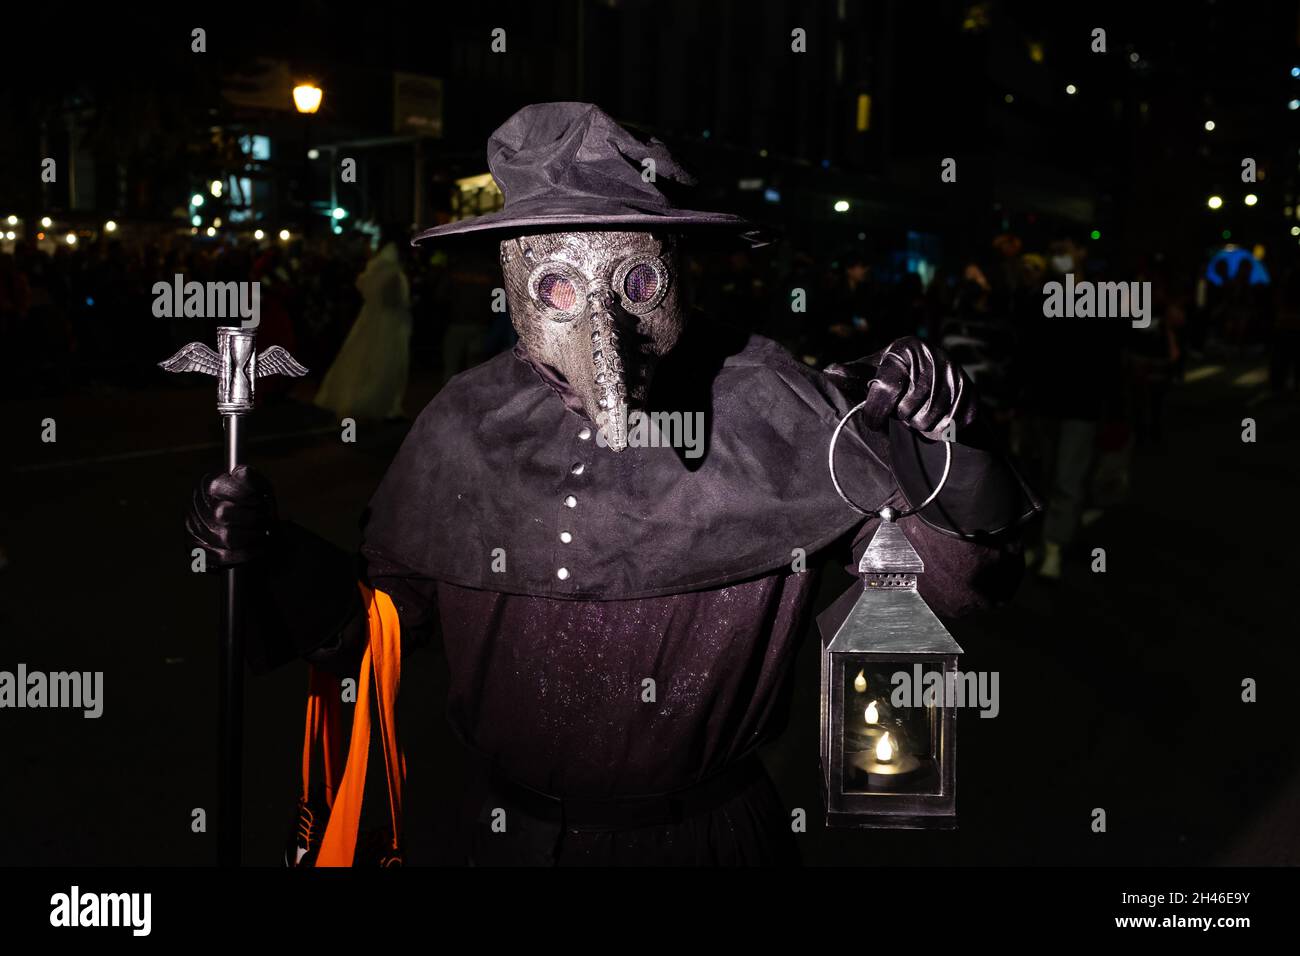 New York City, USA. 31st Oct, 2021. The annual Greenwich Village Halloween parade returned in 2021after a year's suspension because of COVID restrictions. A man dressed as a plague doctor, with elaborate beaked mask, lantern, and cane. Credit: Ed Lefkowicz/Alamy Live News Stock Photo